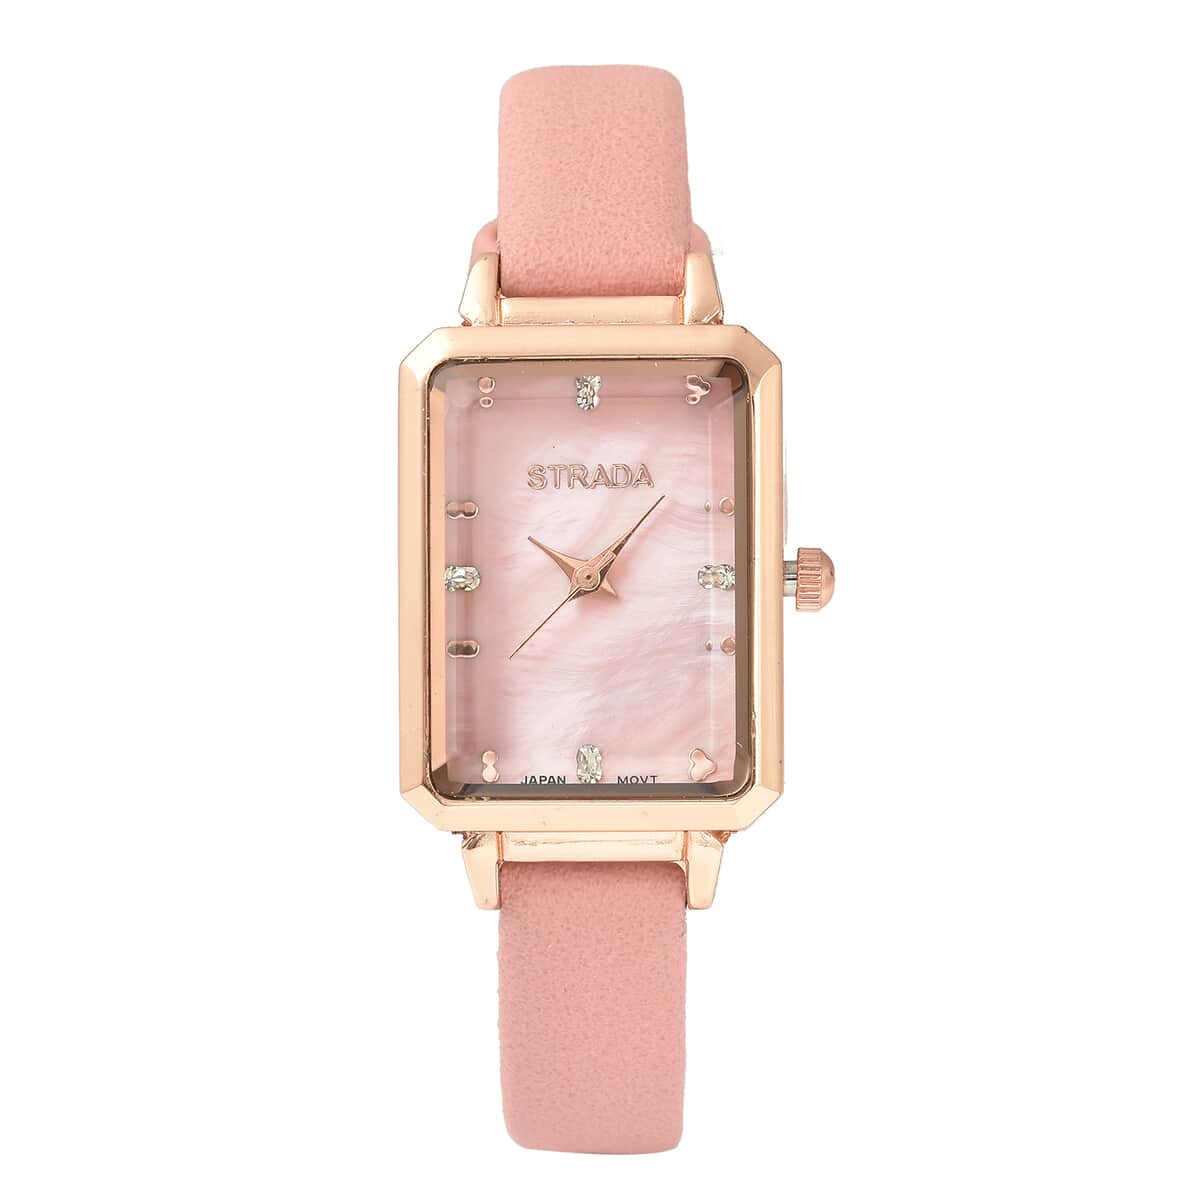 Strada Austrian Crystal Japanese Movement Watch with Pink Faux Leather Strap image number 0